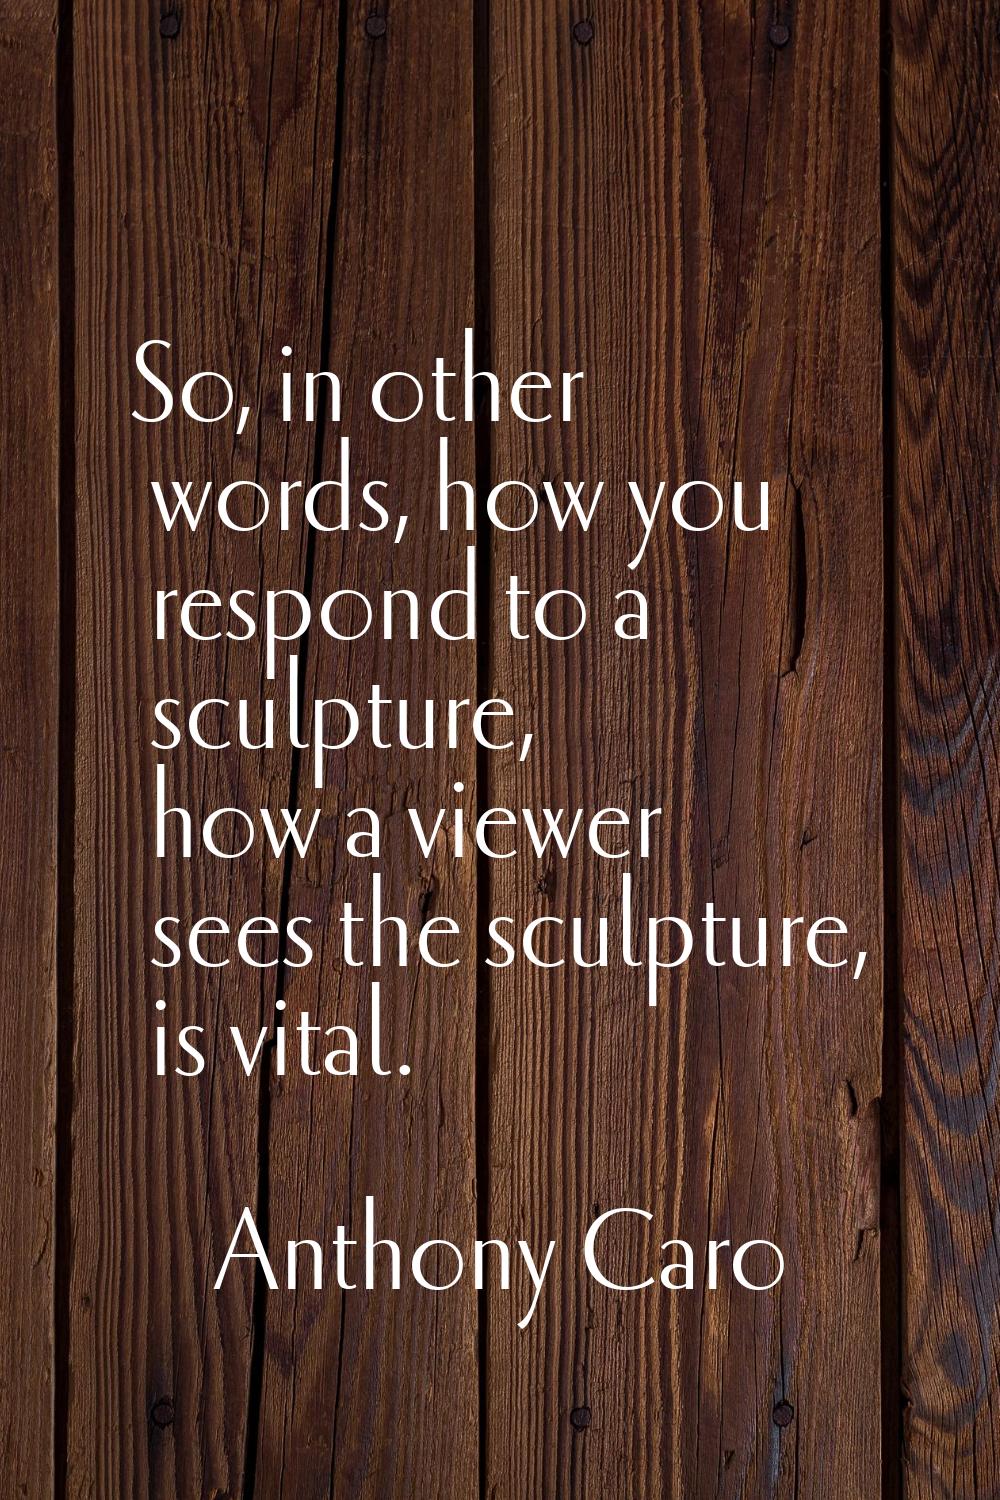 So, in other words, how you respond to a sculpture, how a viewer sees the sculpture, is vital.